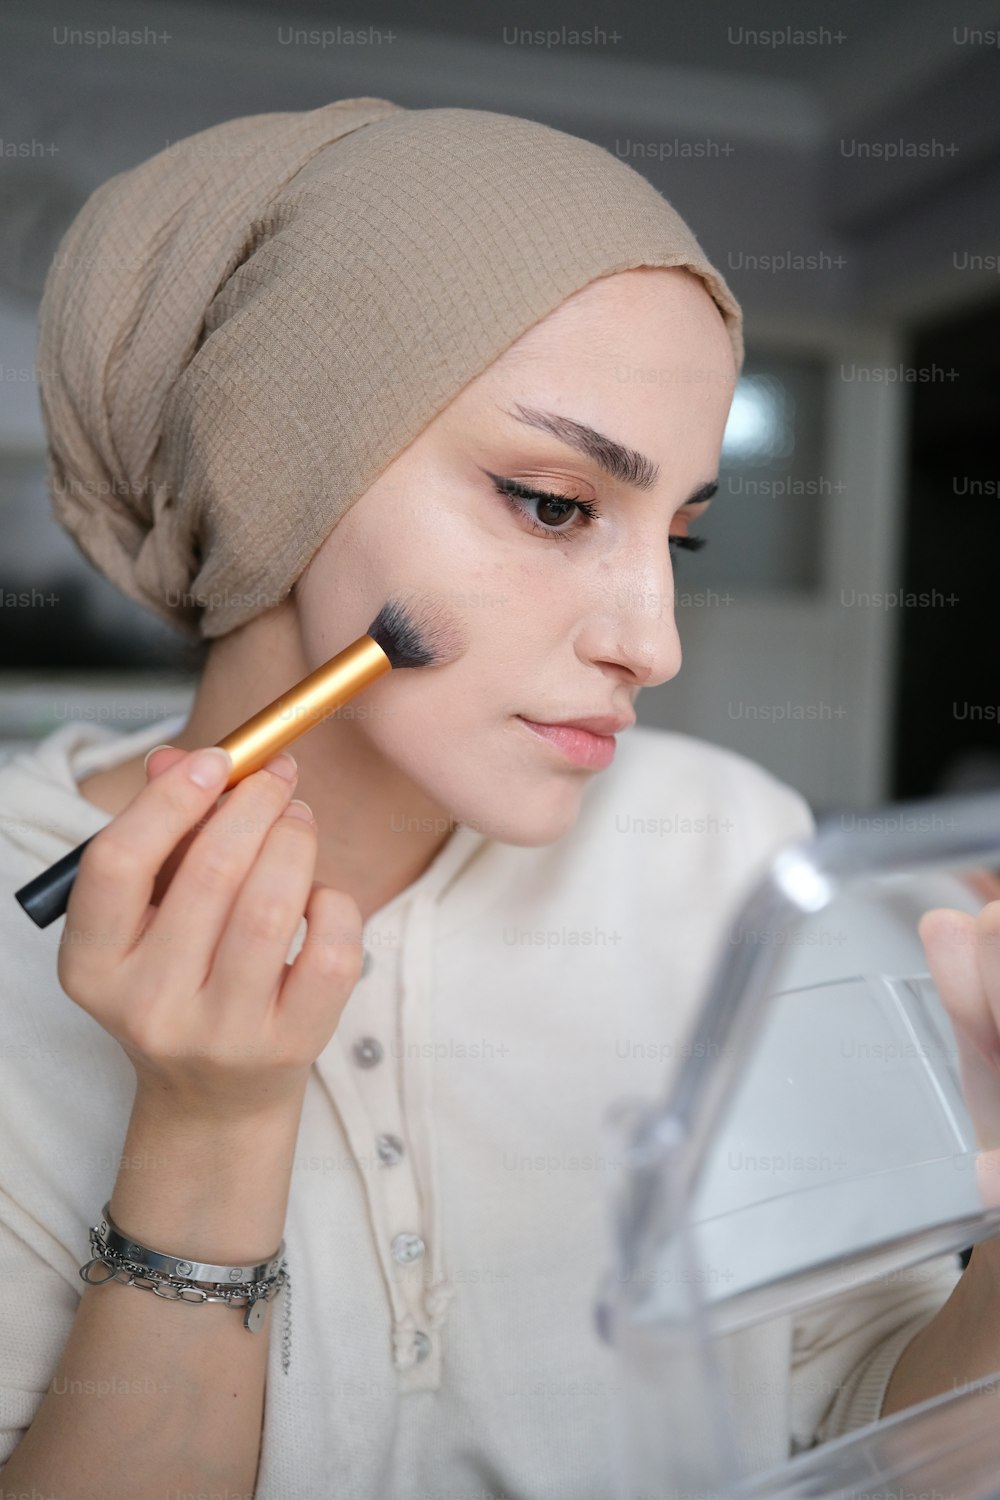 a woman with a turban on putting on makeup